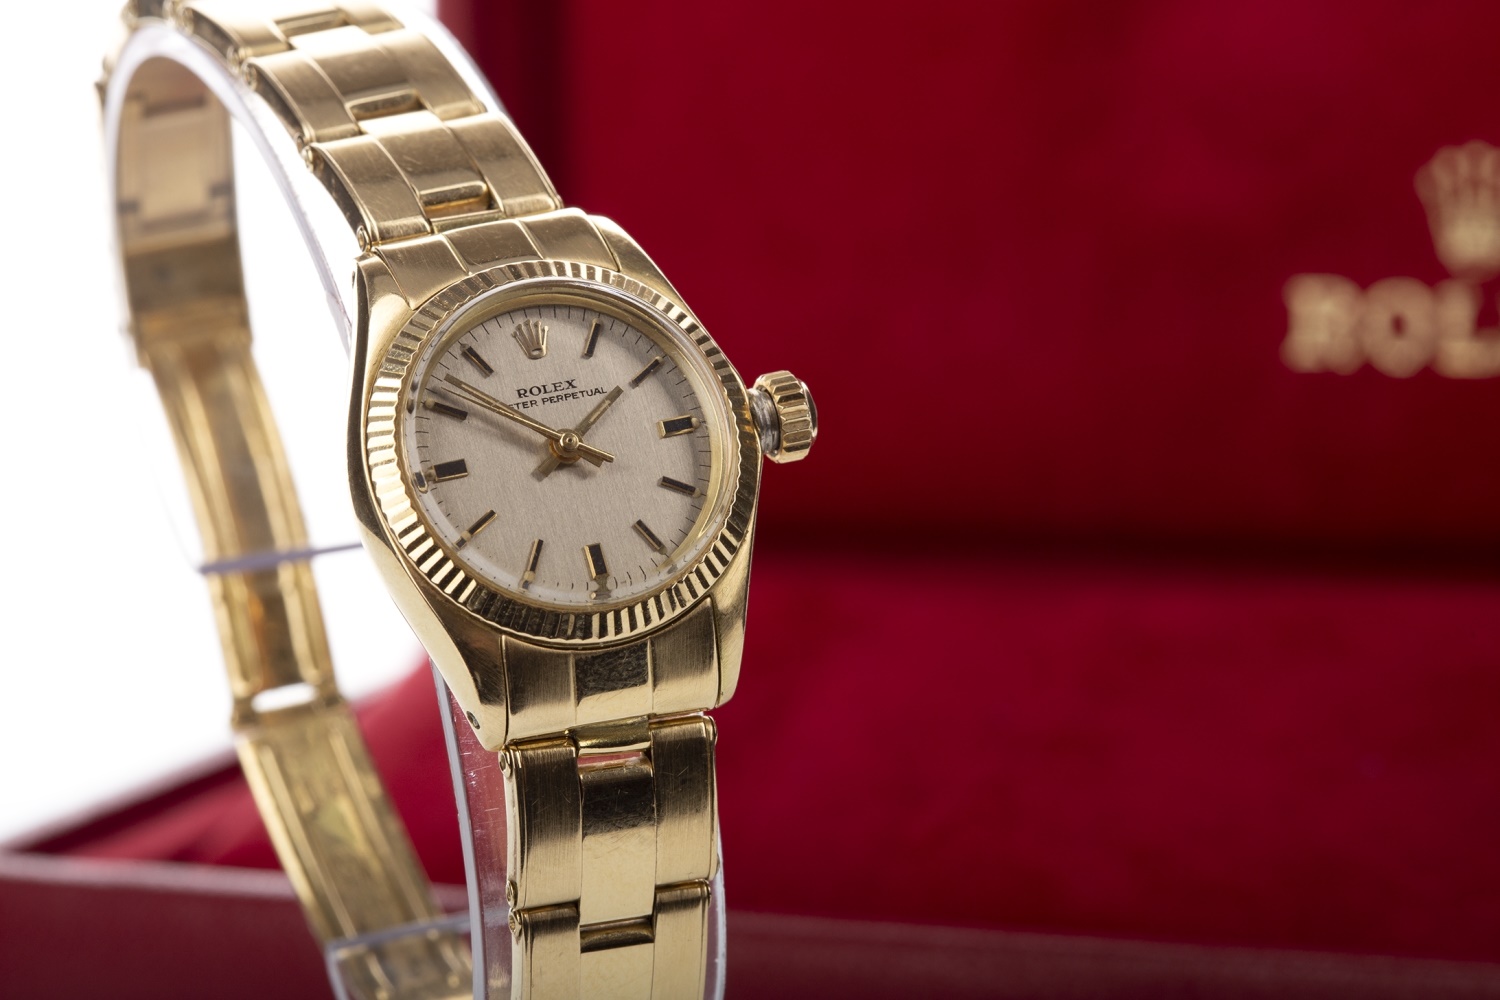 LADYS ROLEX GOLD WATCH - Image 6 of 7